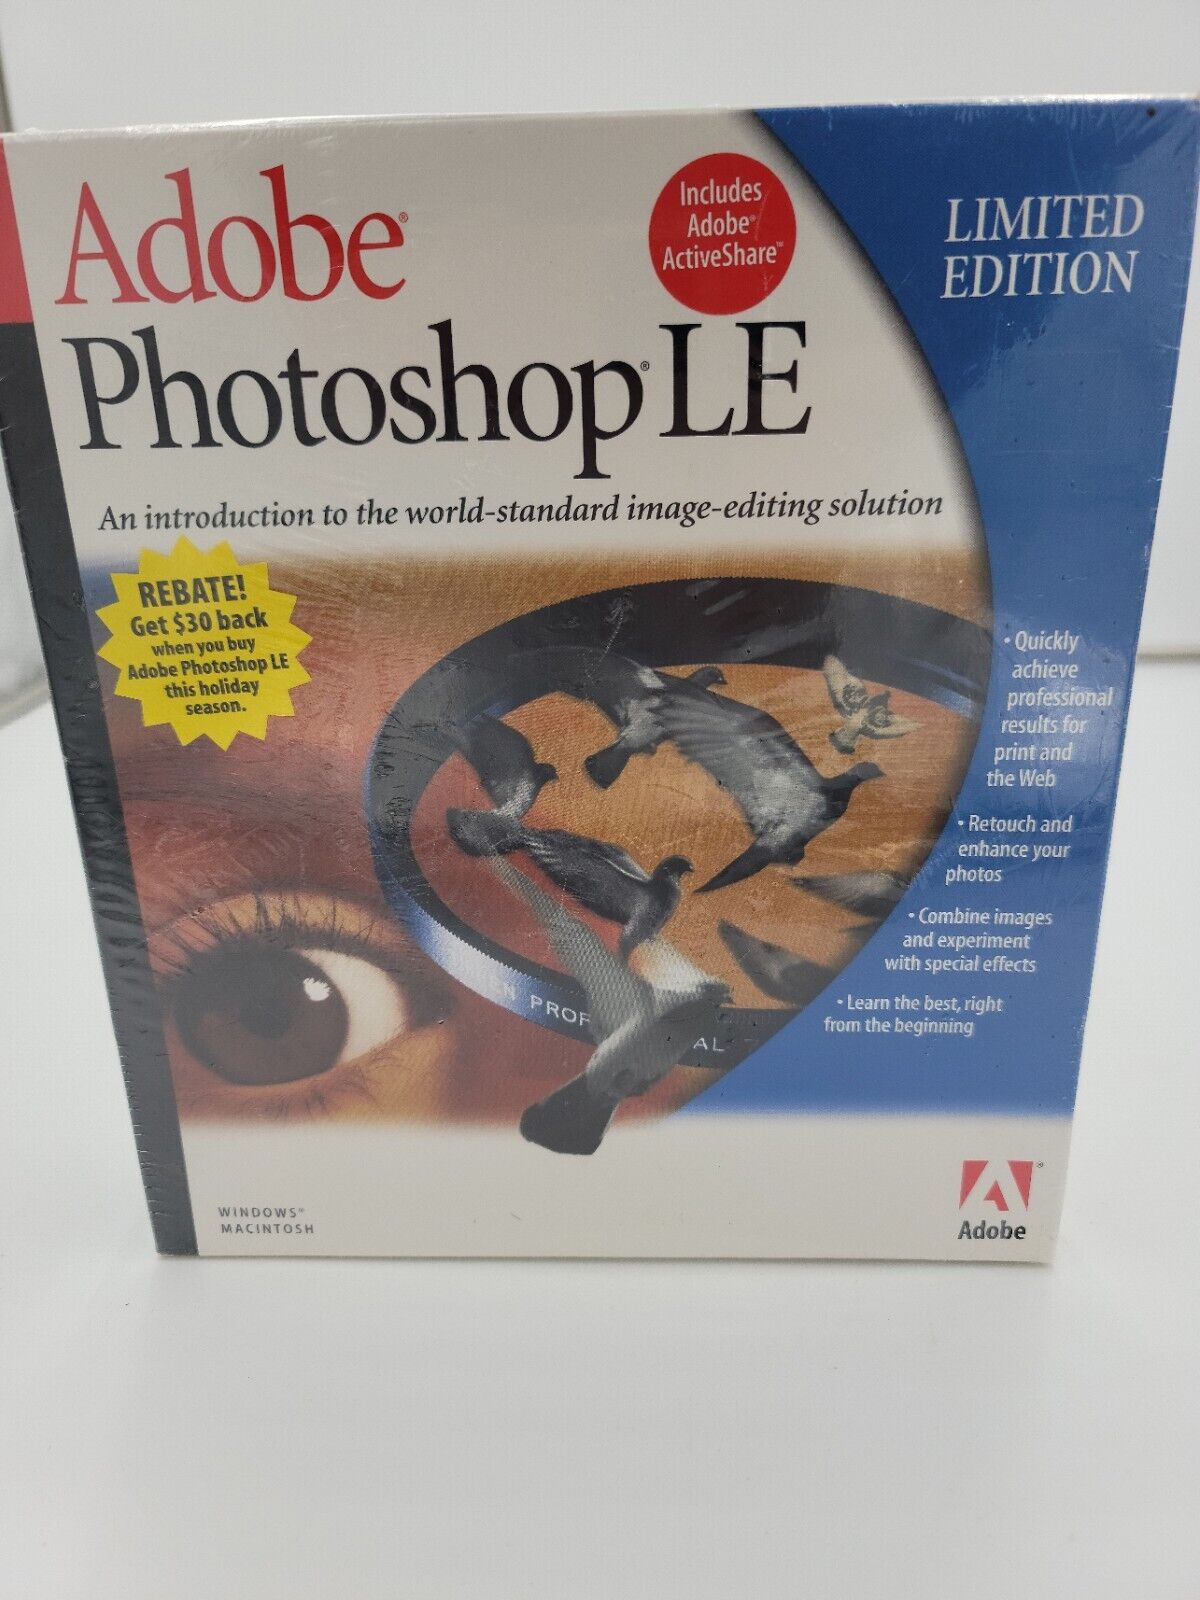 Adobe Photoshop LE Limited Edition New Sealed